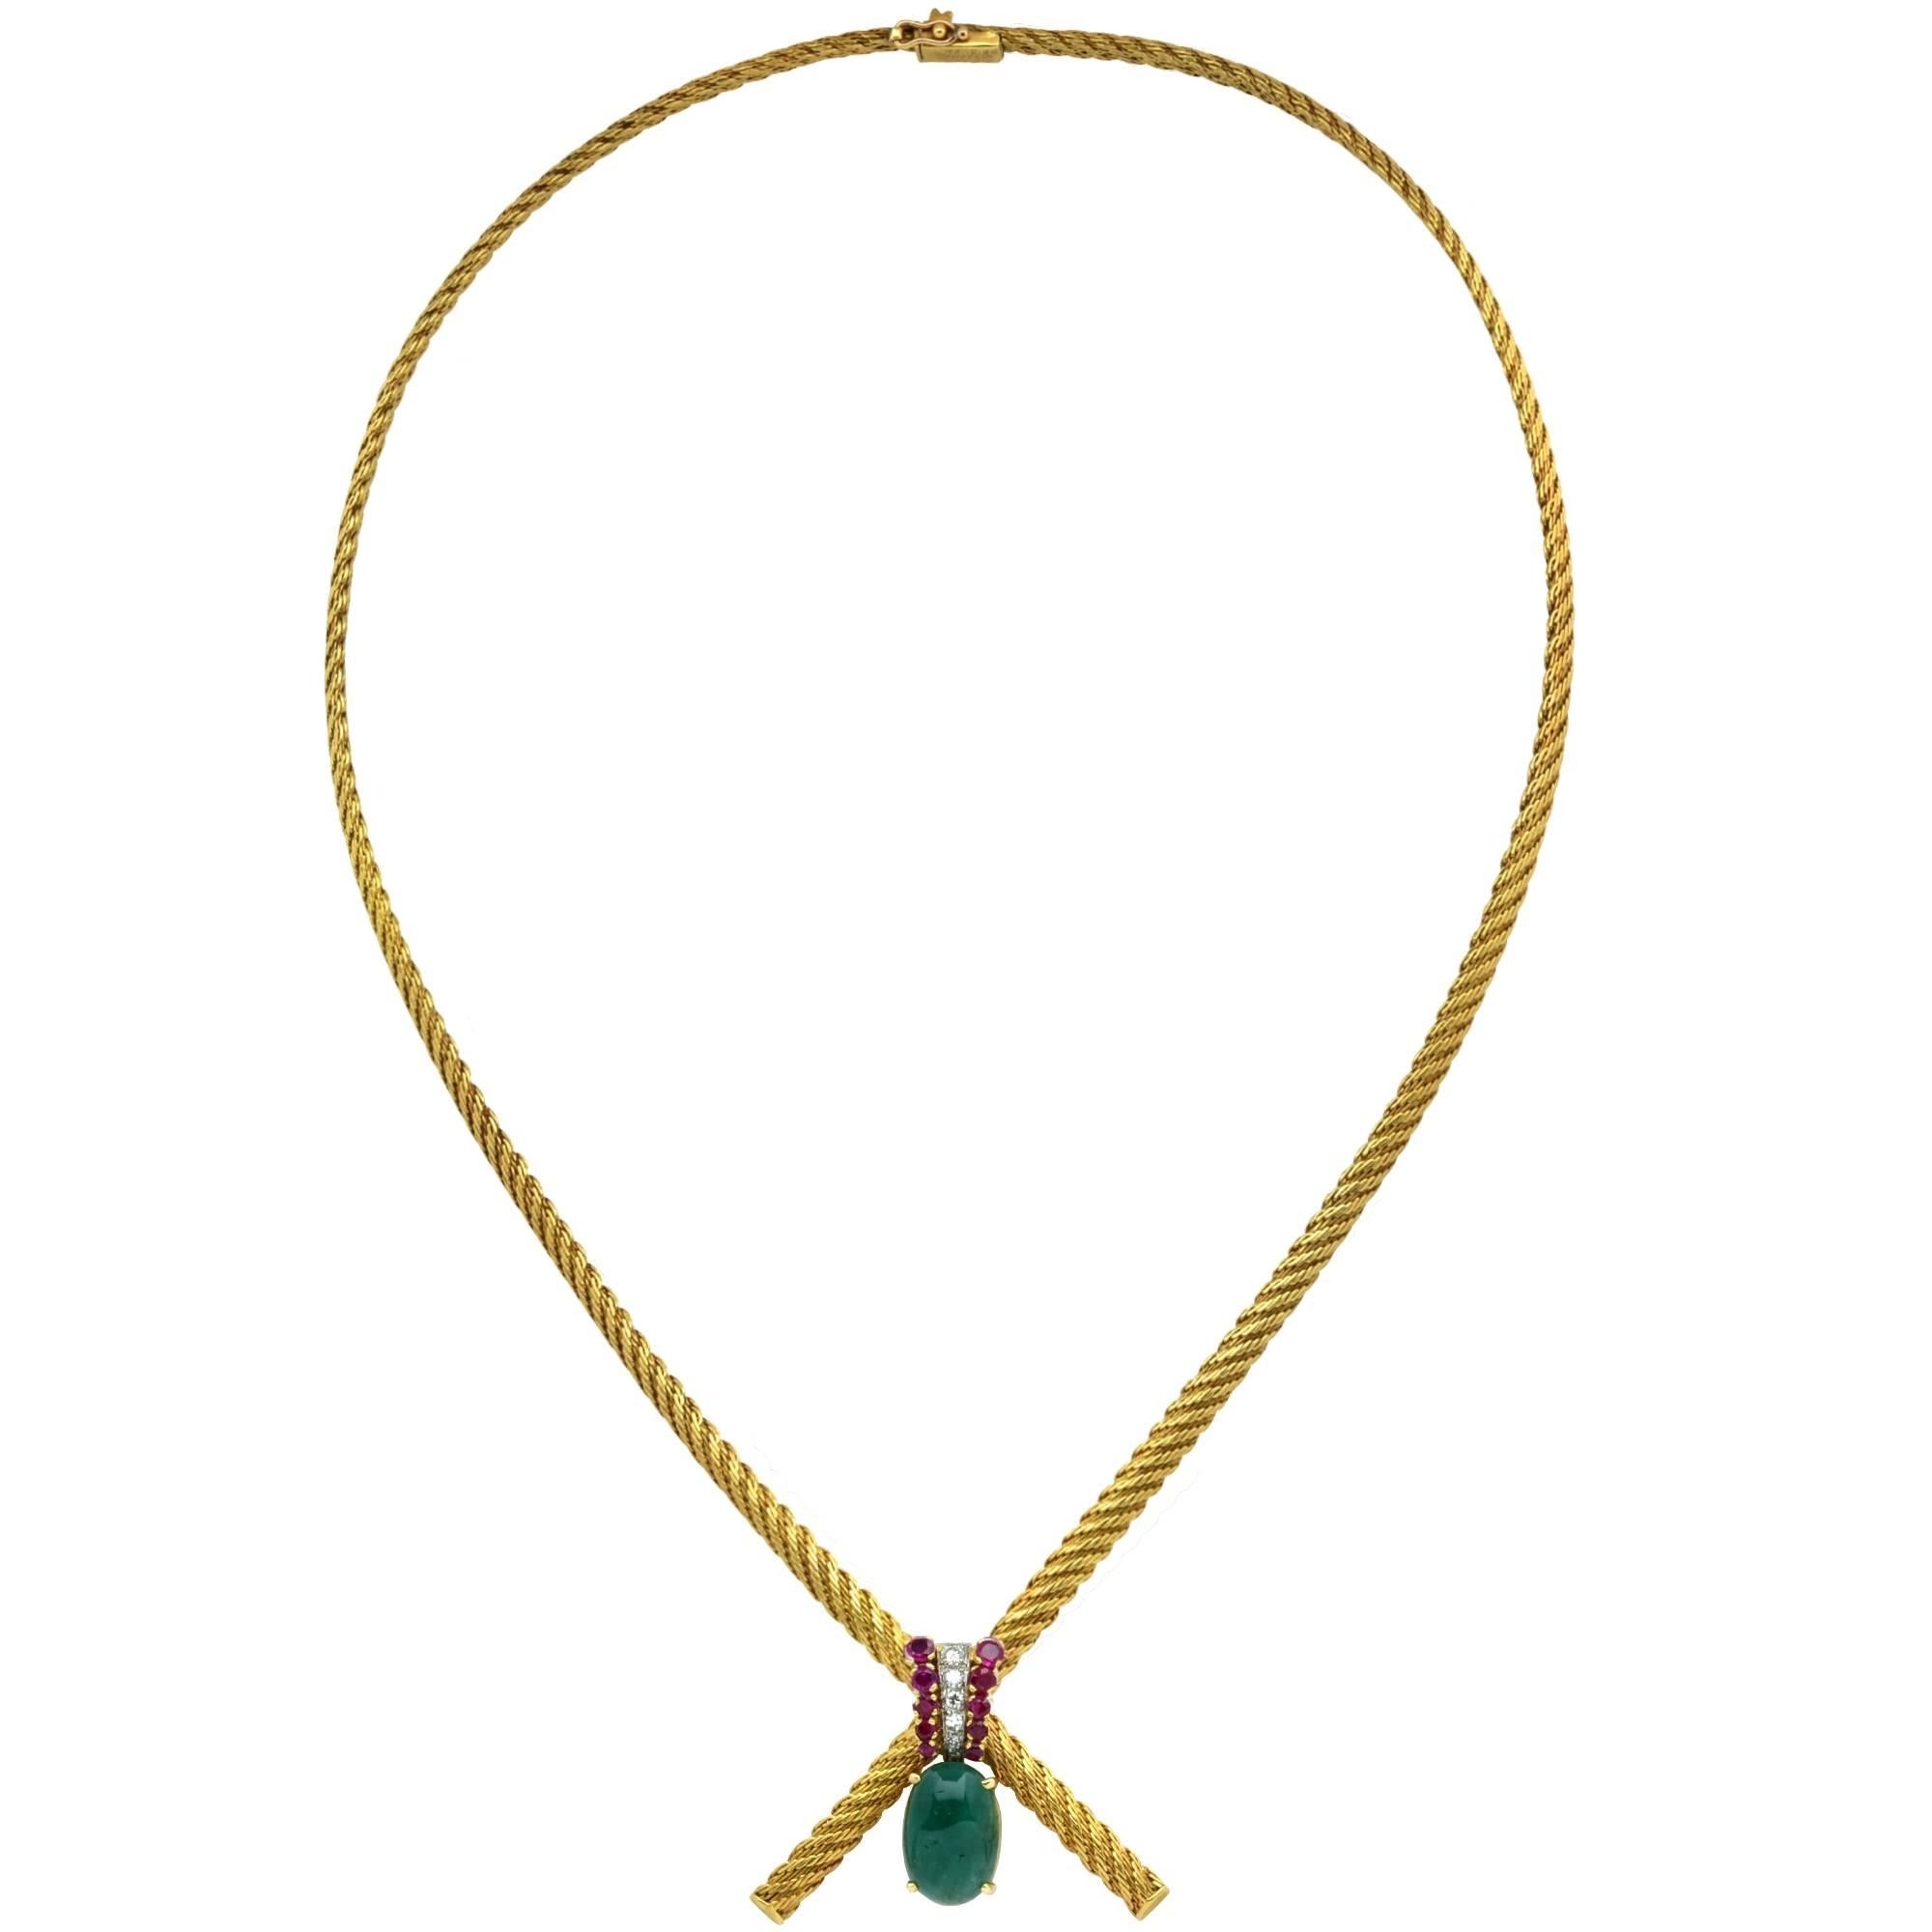 18k yellow gold necklace containing a green cabochon emerald accented by 10 rubies and 5 single and round brilliant cut diamonds. Signed Gubelin as well as French Hallmarked.

The necklace measures 19 inches in length and the pendant measures 1.10